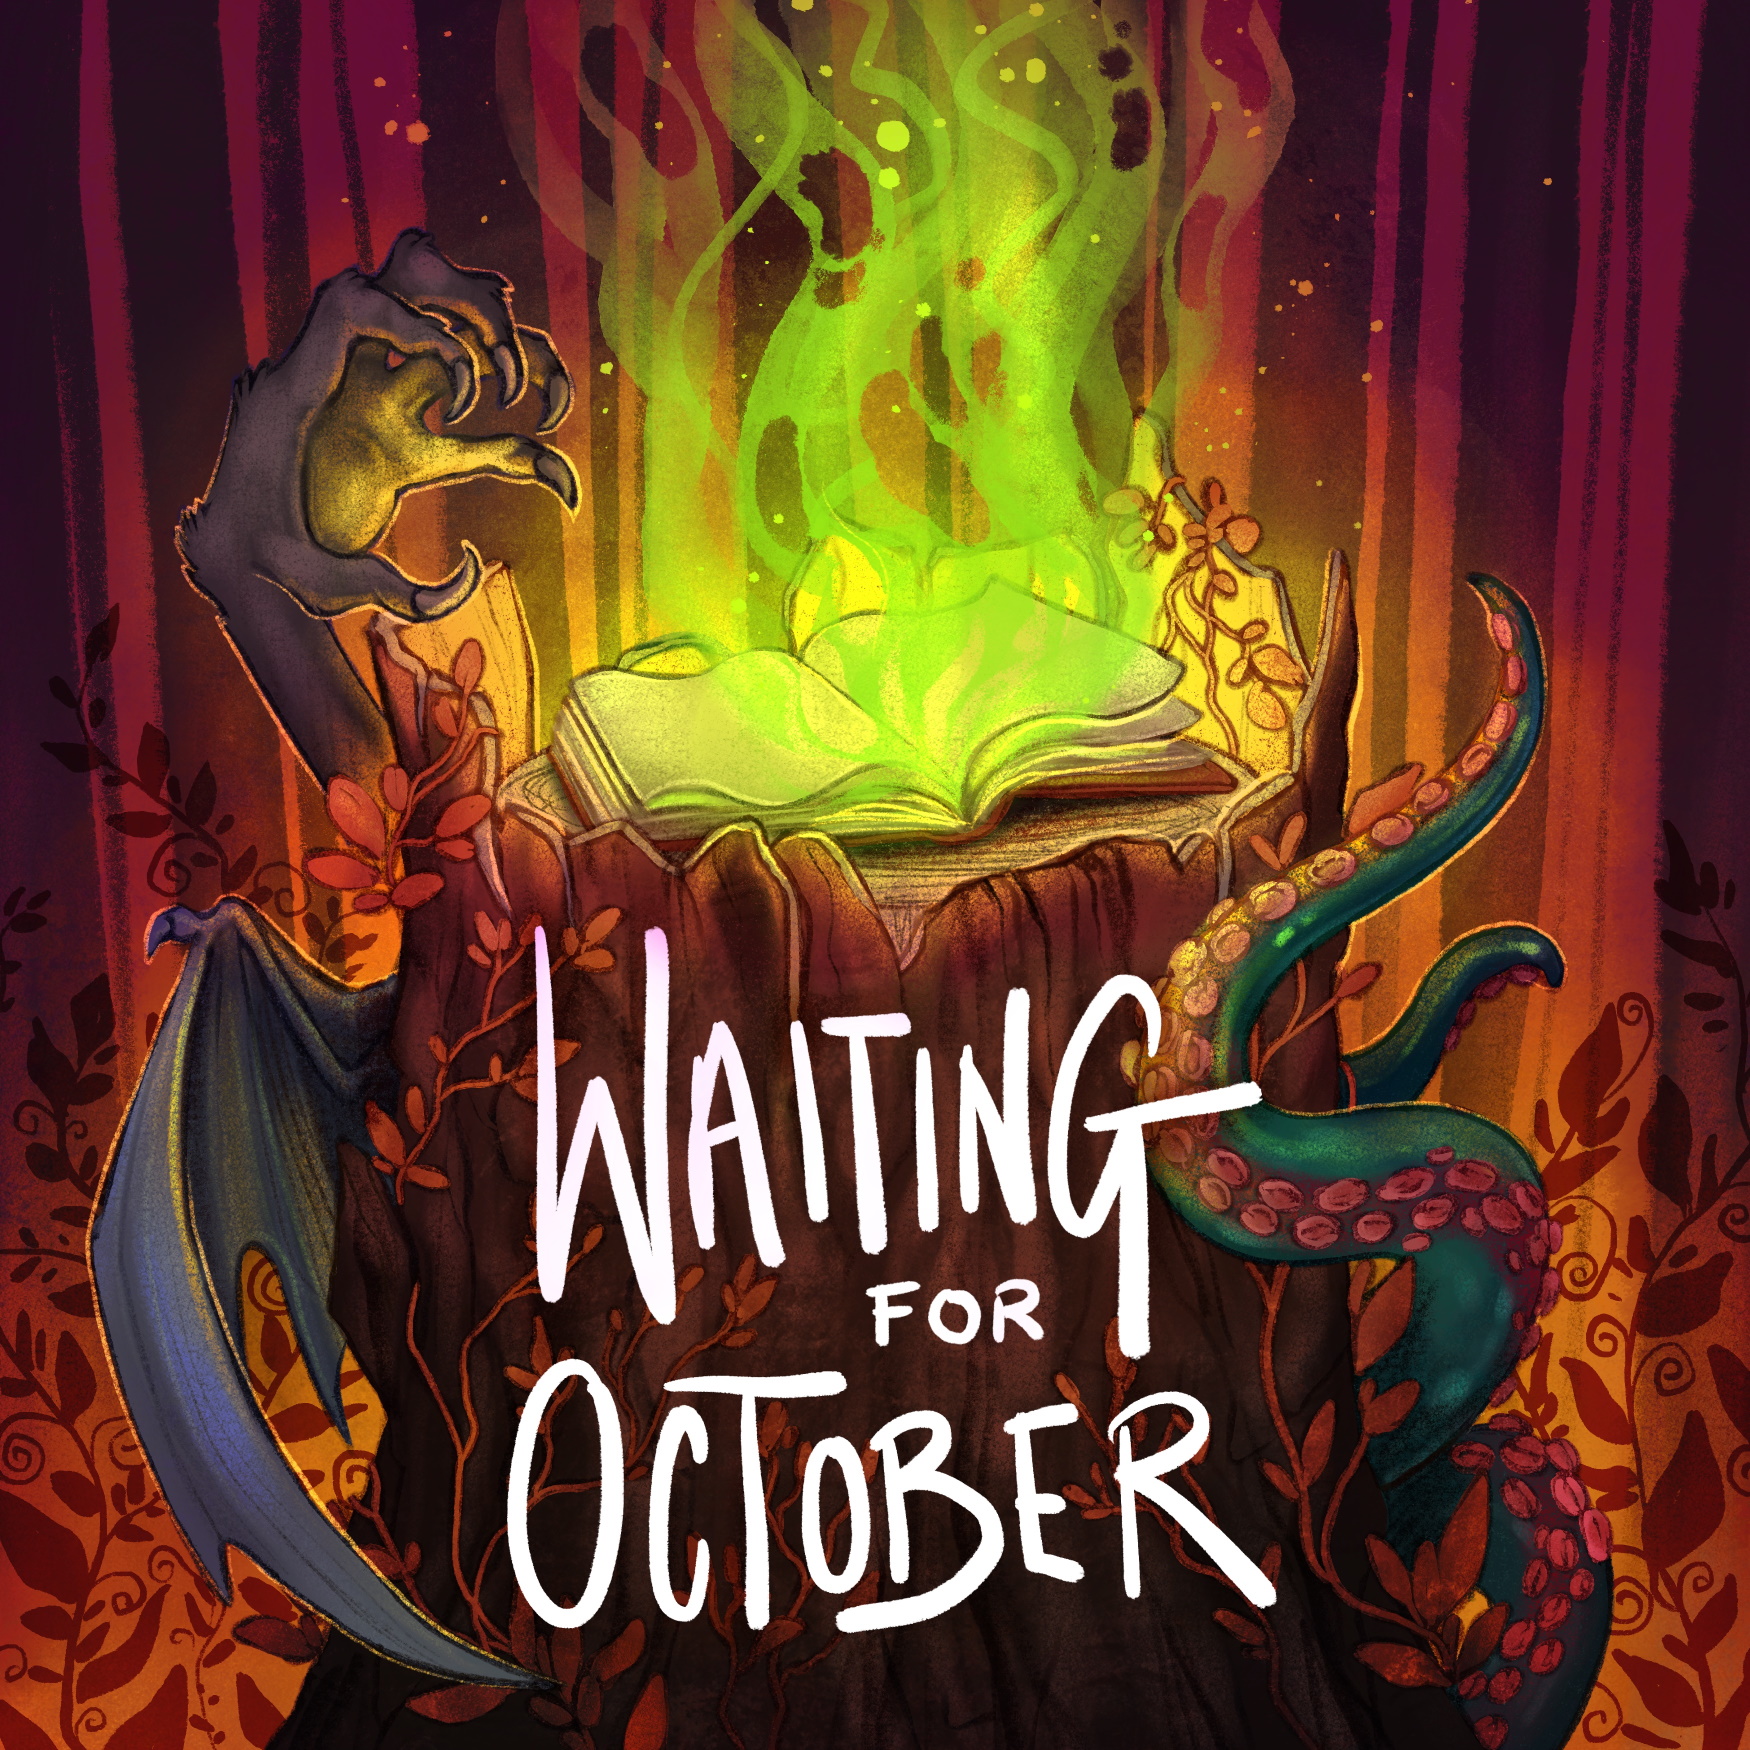 The cover art for the show is of a tree stump in a forest with various monstrous limbs reaching around it - a clawed hand, a wing, a few tentacles - and on the stump itself is an open book with mystical energy rising from it. The colours of the woods behind are very red and orange. Superimposed are the words, "Waiting For October"